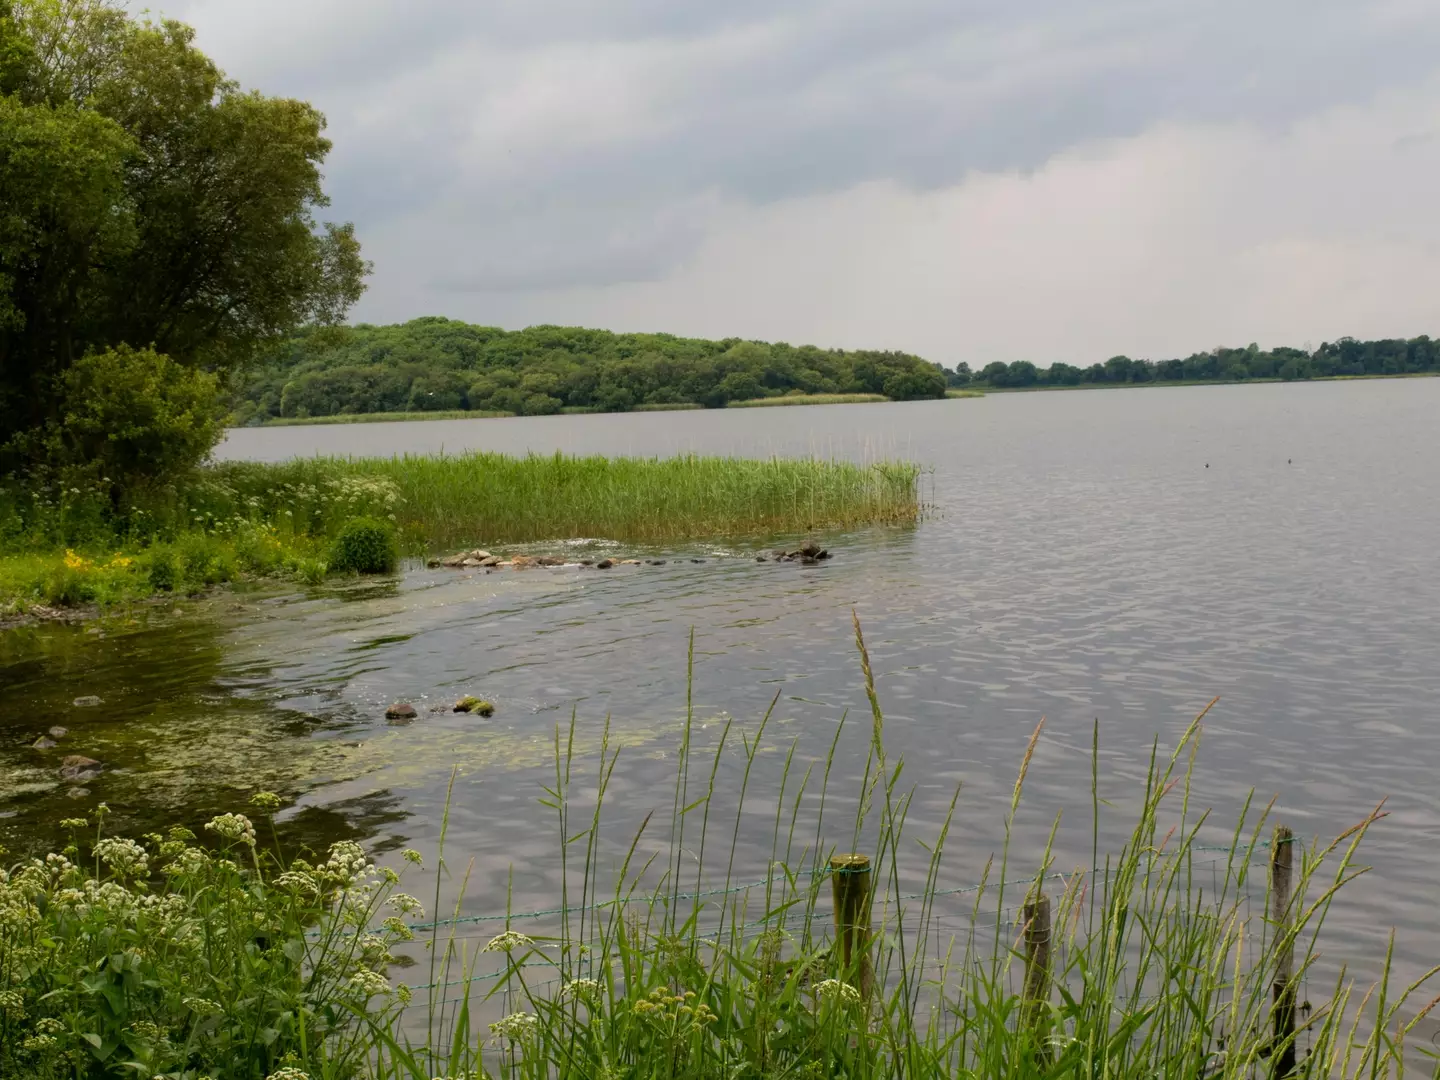 The poisonous algae was found near Lough Neagh in Northern Ireland.